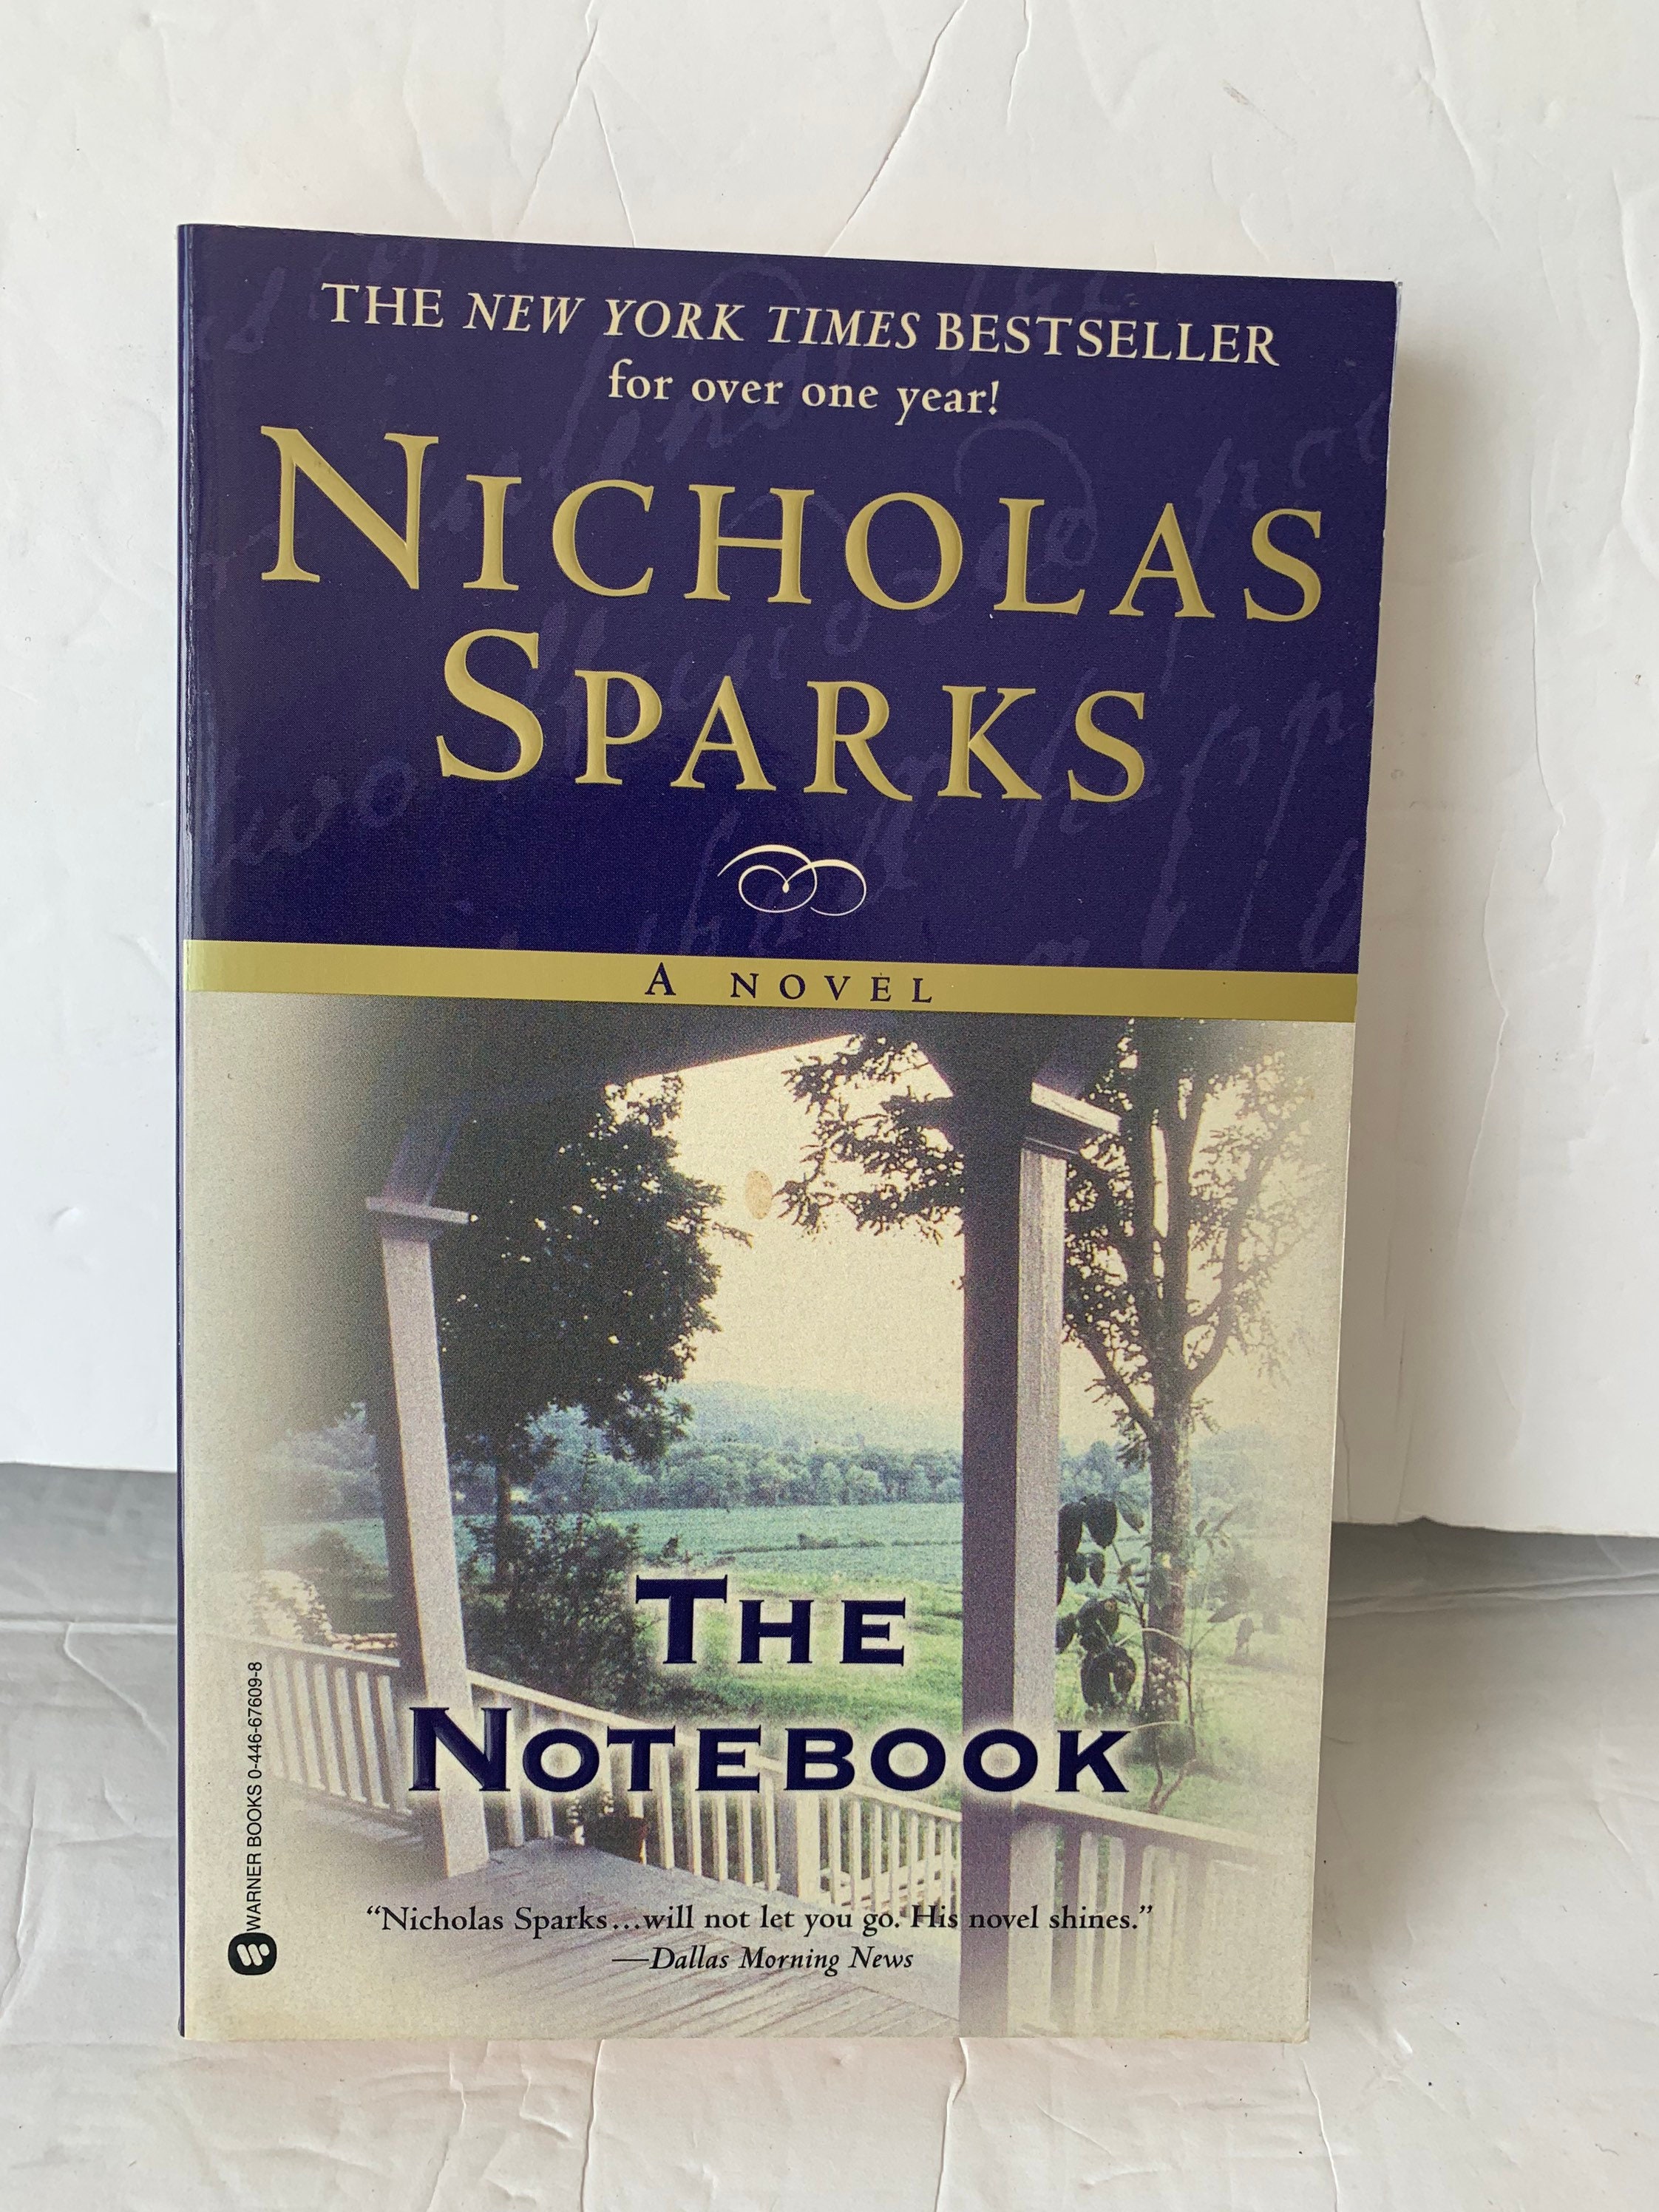 Nicholas Sparks Paperback Books Choose Your Own Title Etsy